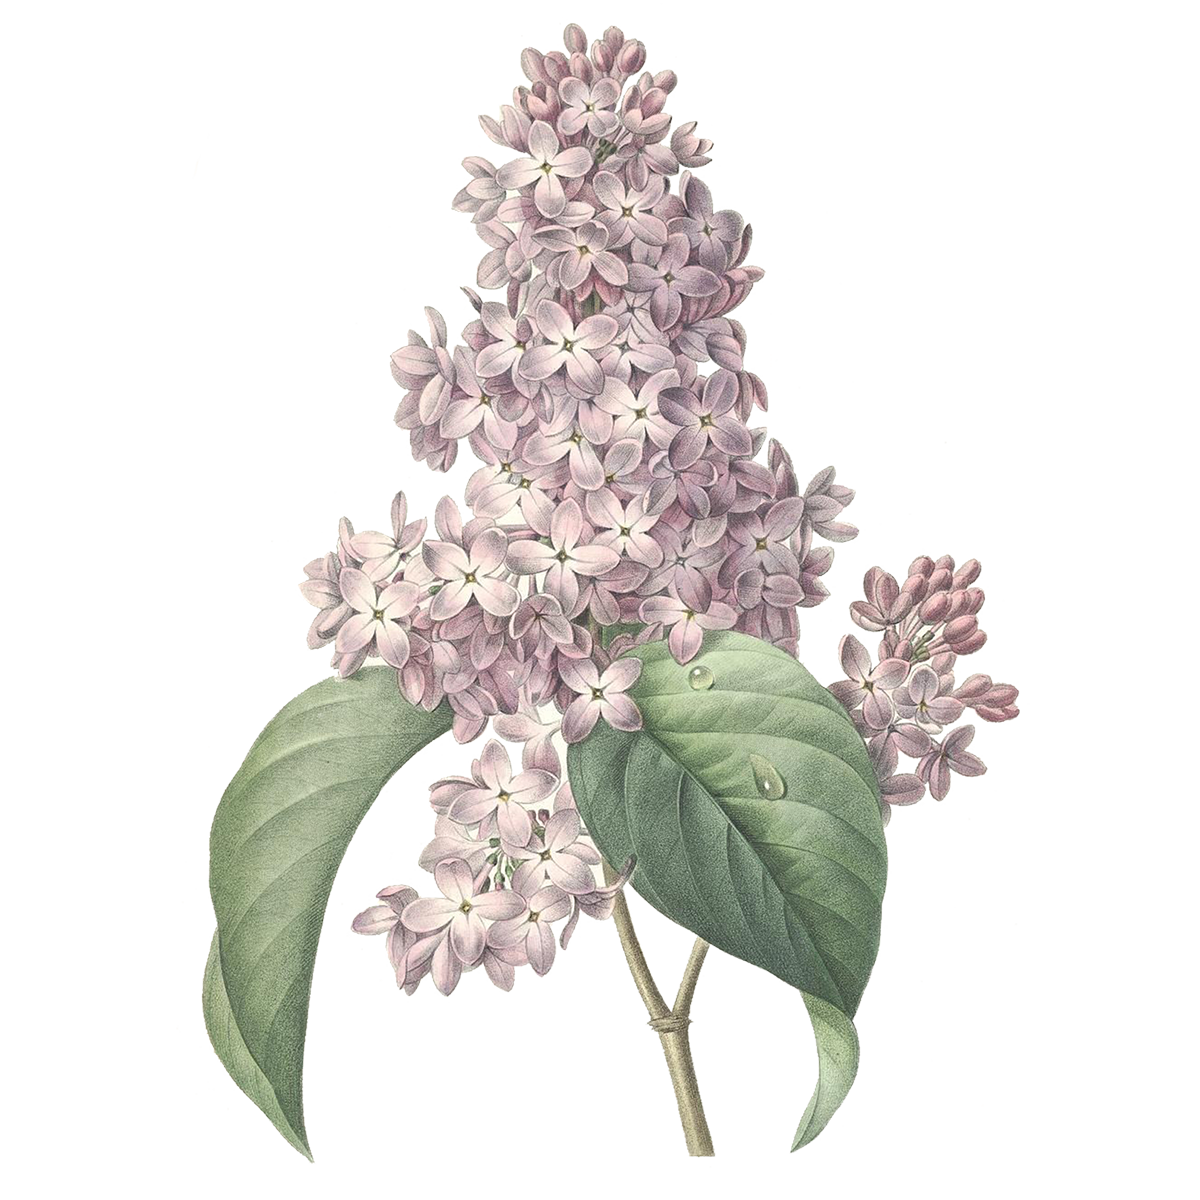 Flower Aesthetic PNG HD Quality